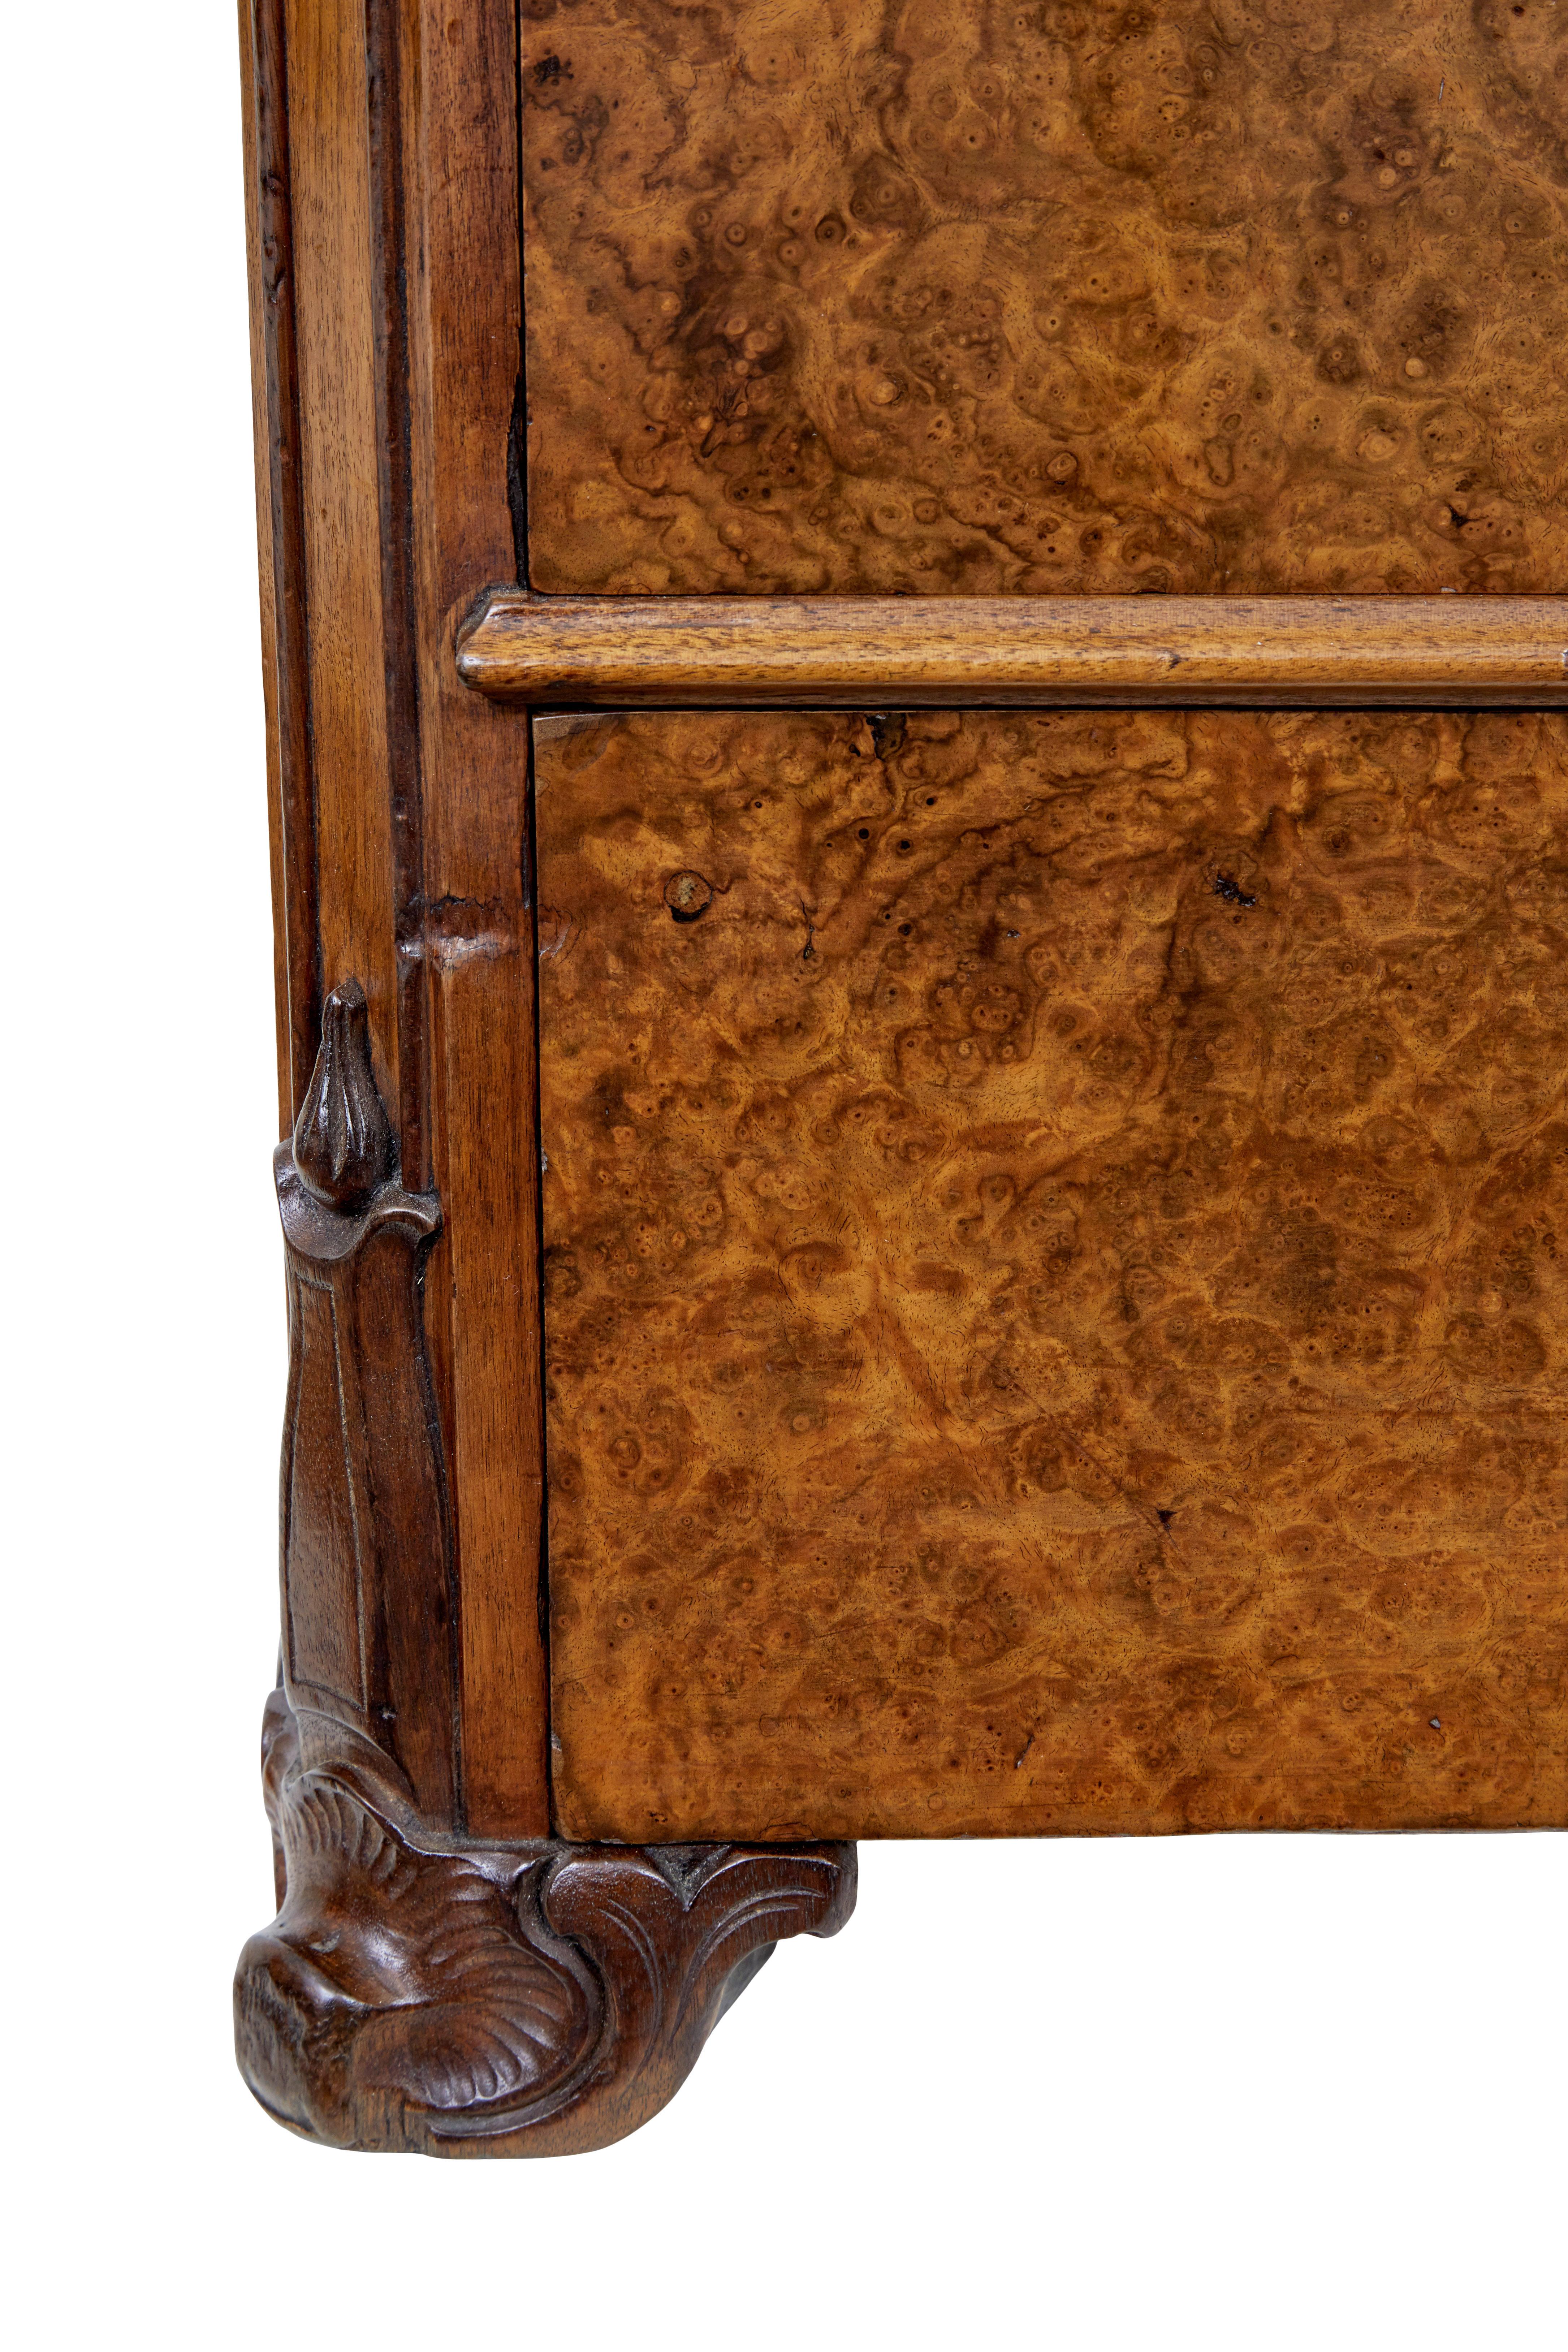 19th Century 19th century burr walnut chest of drawers For Sale